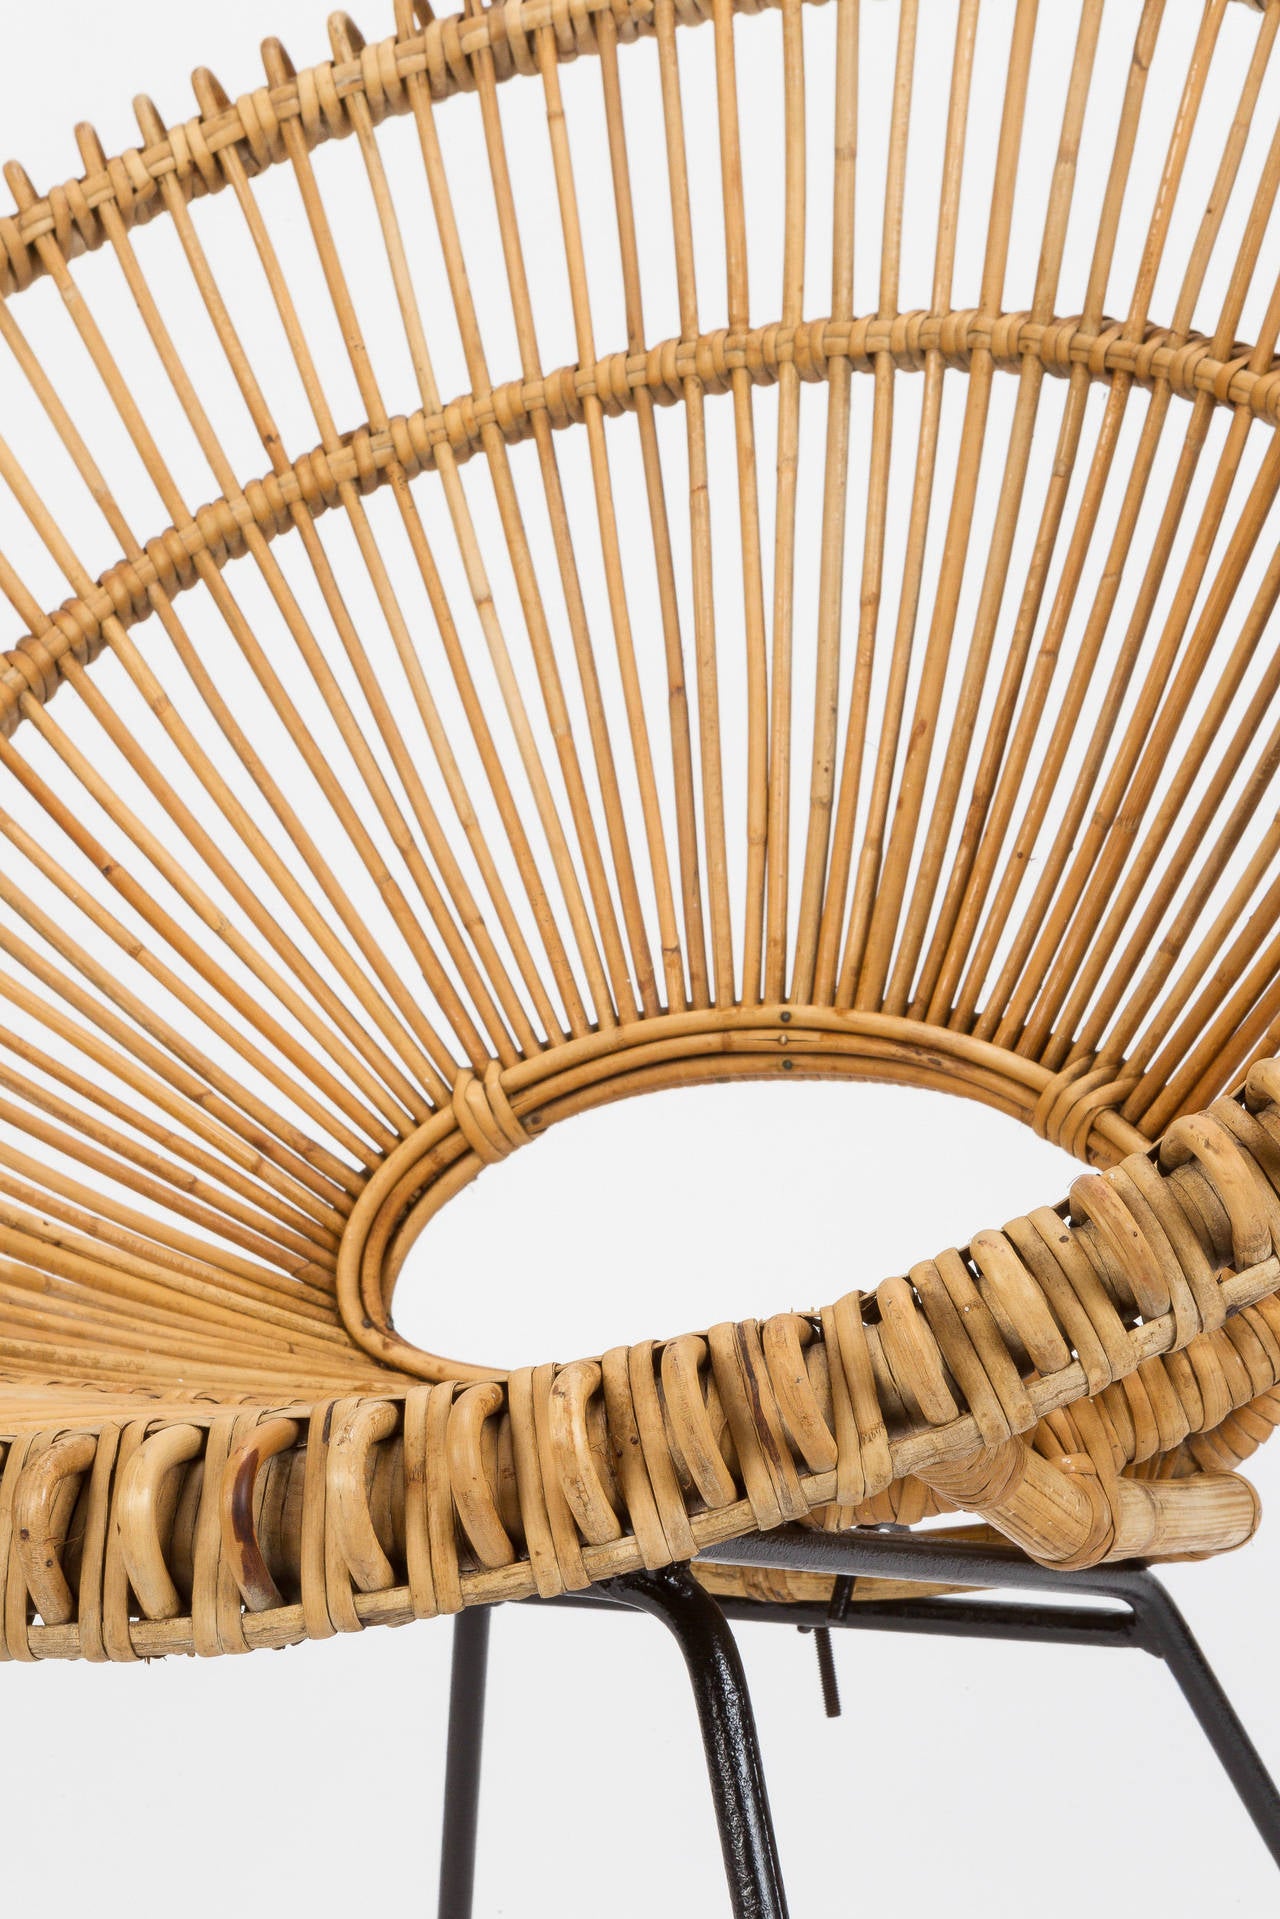 Bamboo French Wicker Chair Attributed to Janine Abraham & Dirk Jan Rol, 1950s